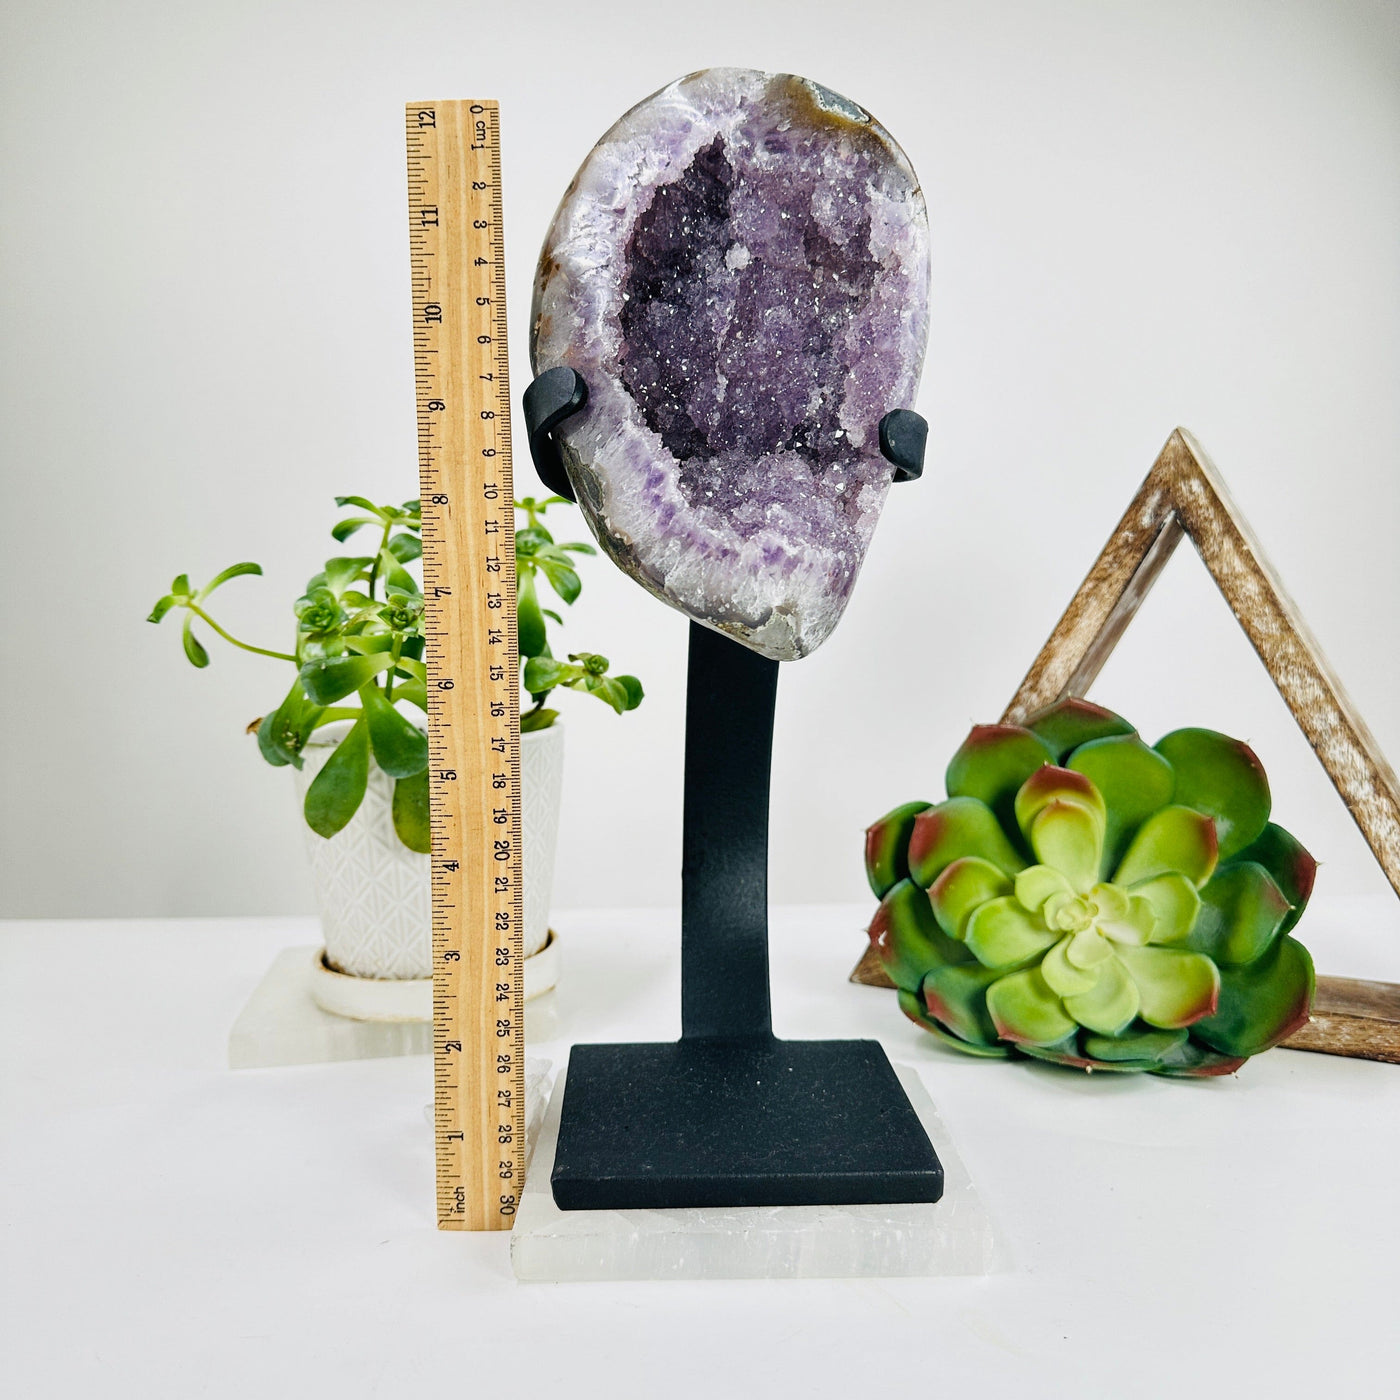 amethyst geode on stand next to a ruler for size reference